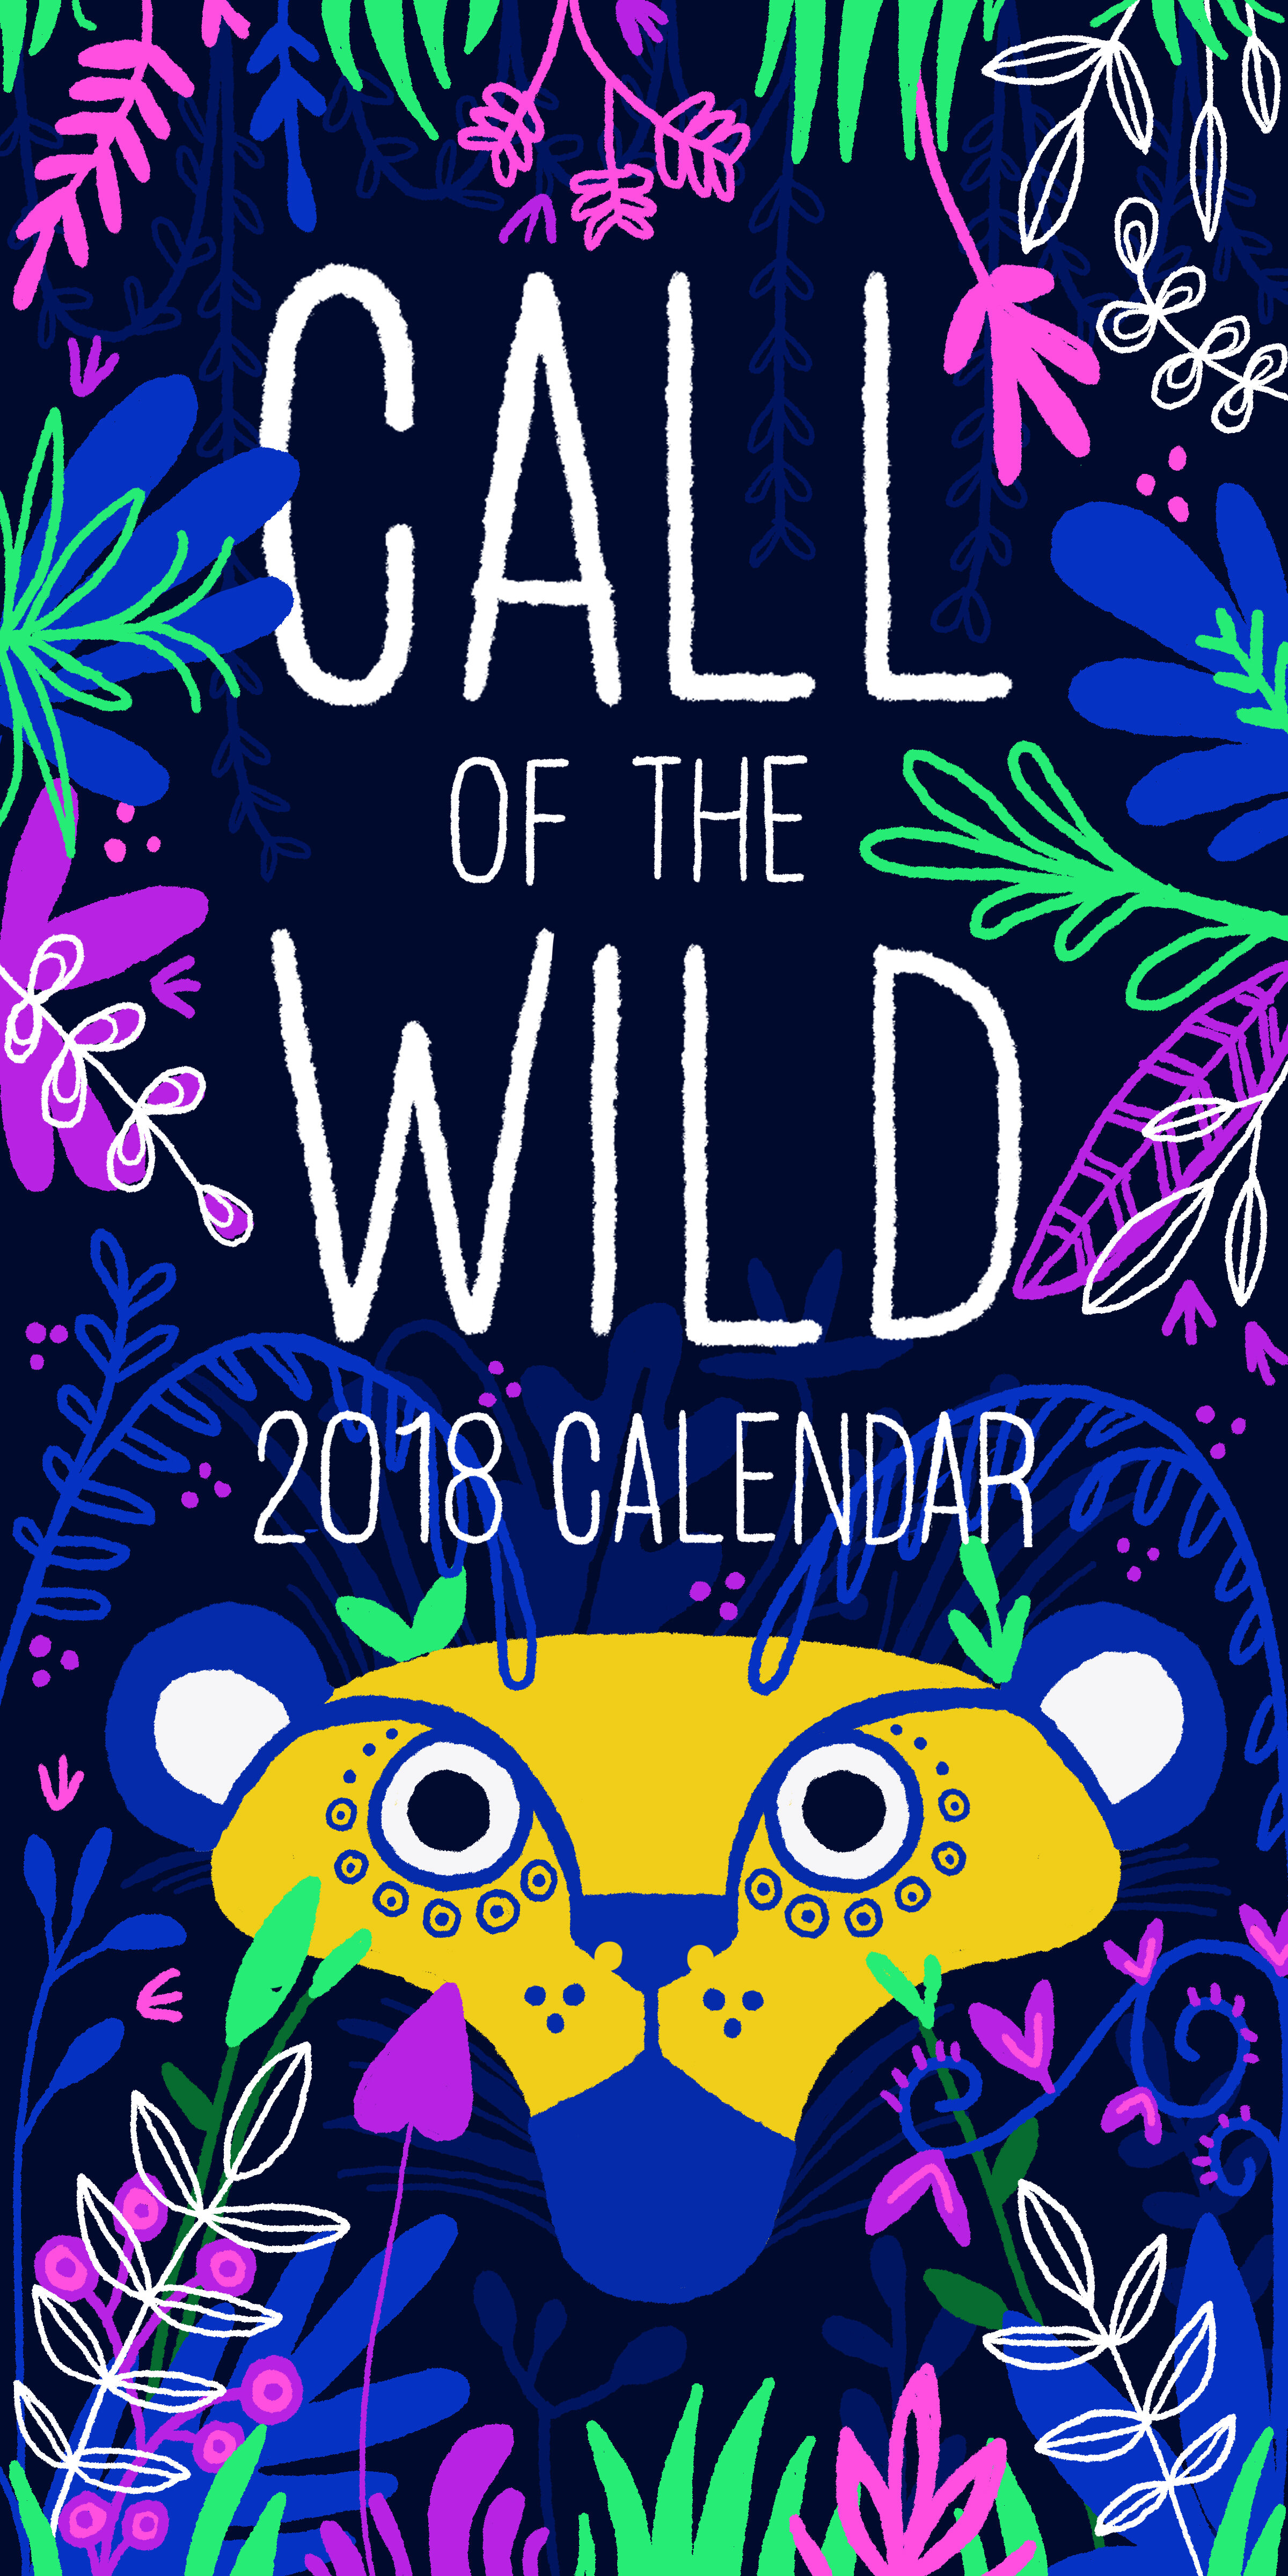 Call of the Wild Calendar: Title Page